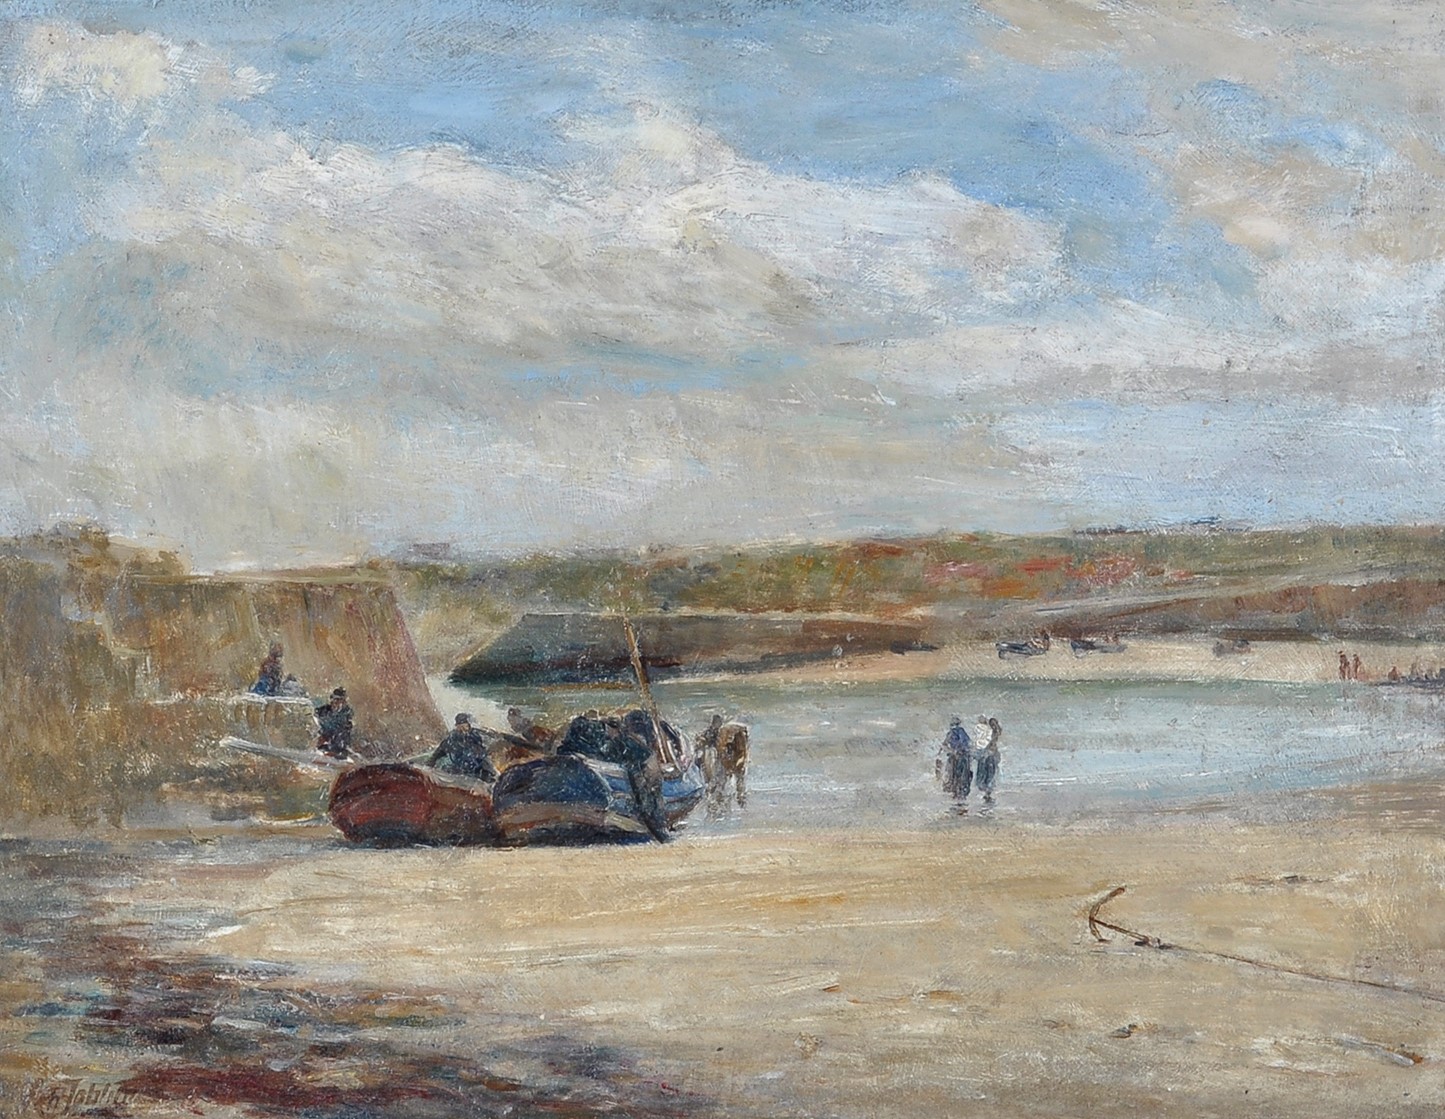 Cobles and fisherfolk on the beach at Cullercoats